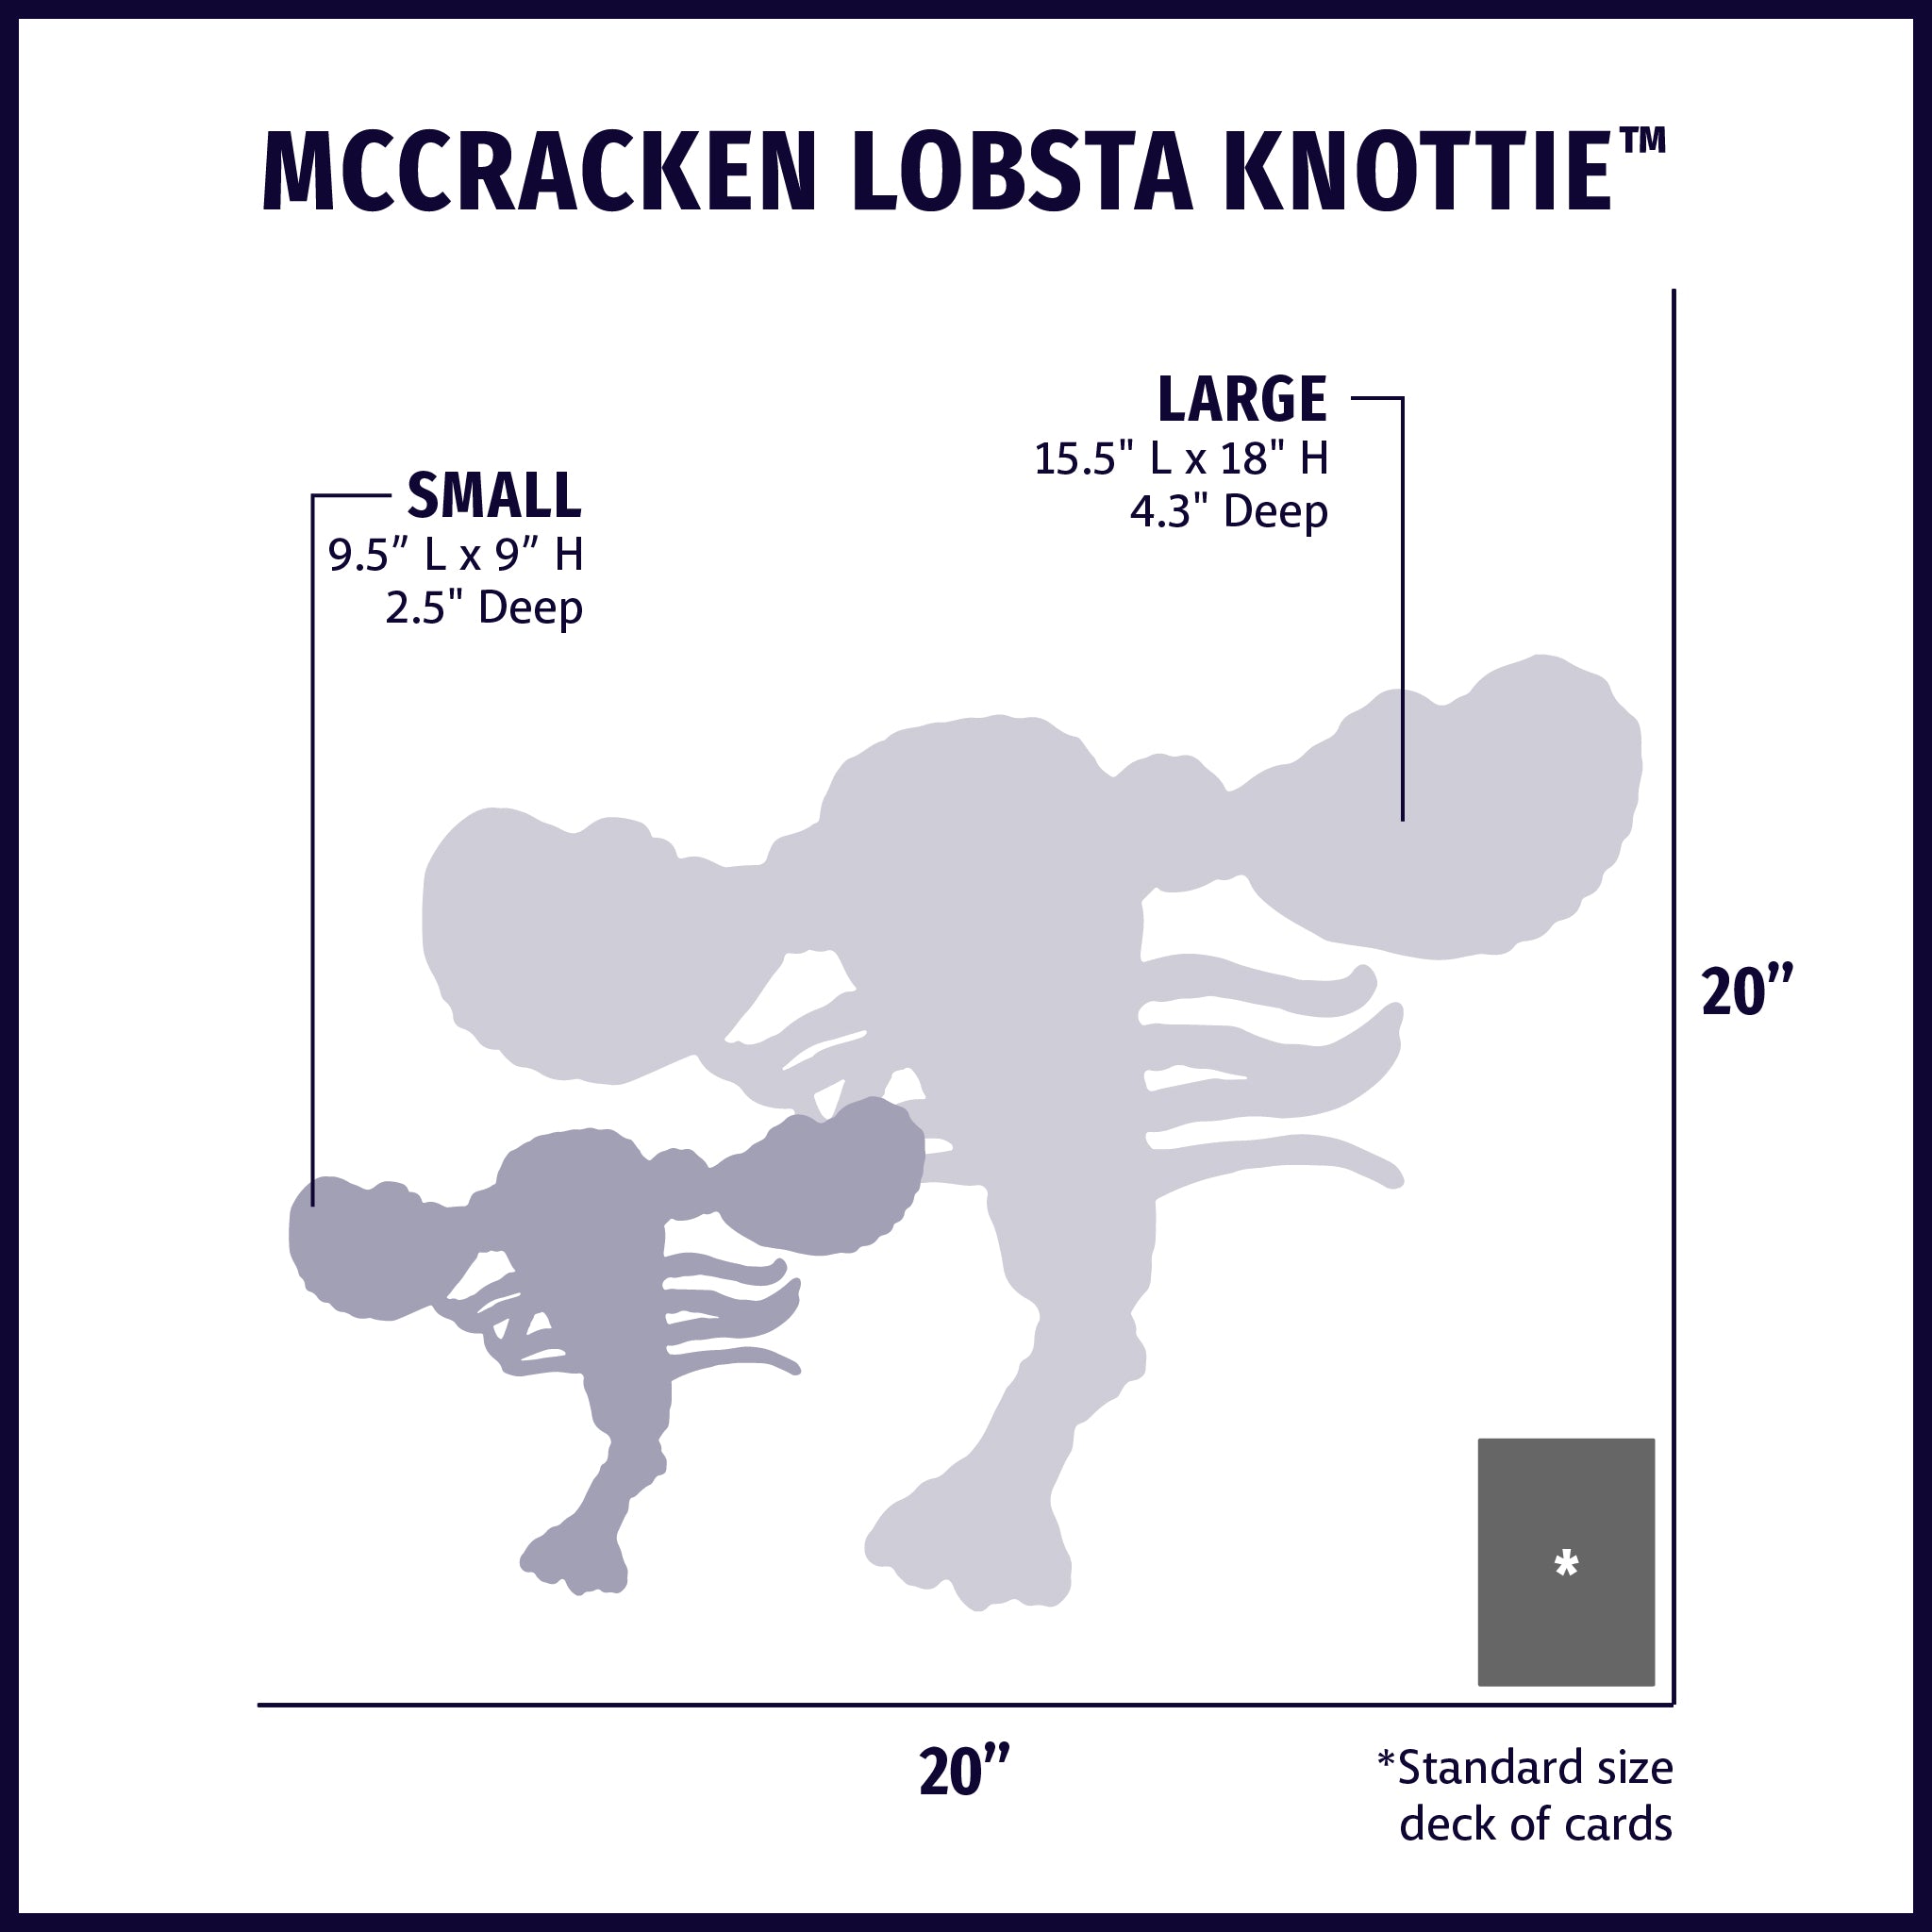 Size chart displaying McCracken Lobsta™ Knottie® plush dog toy silhouettes in small and large with approximate dimensions of each size compared to standard size deck of cards.